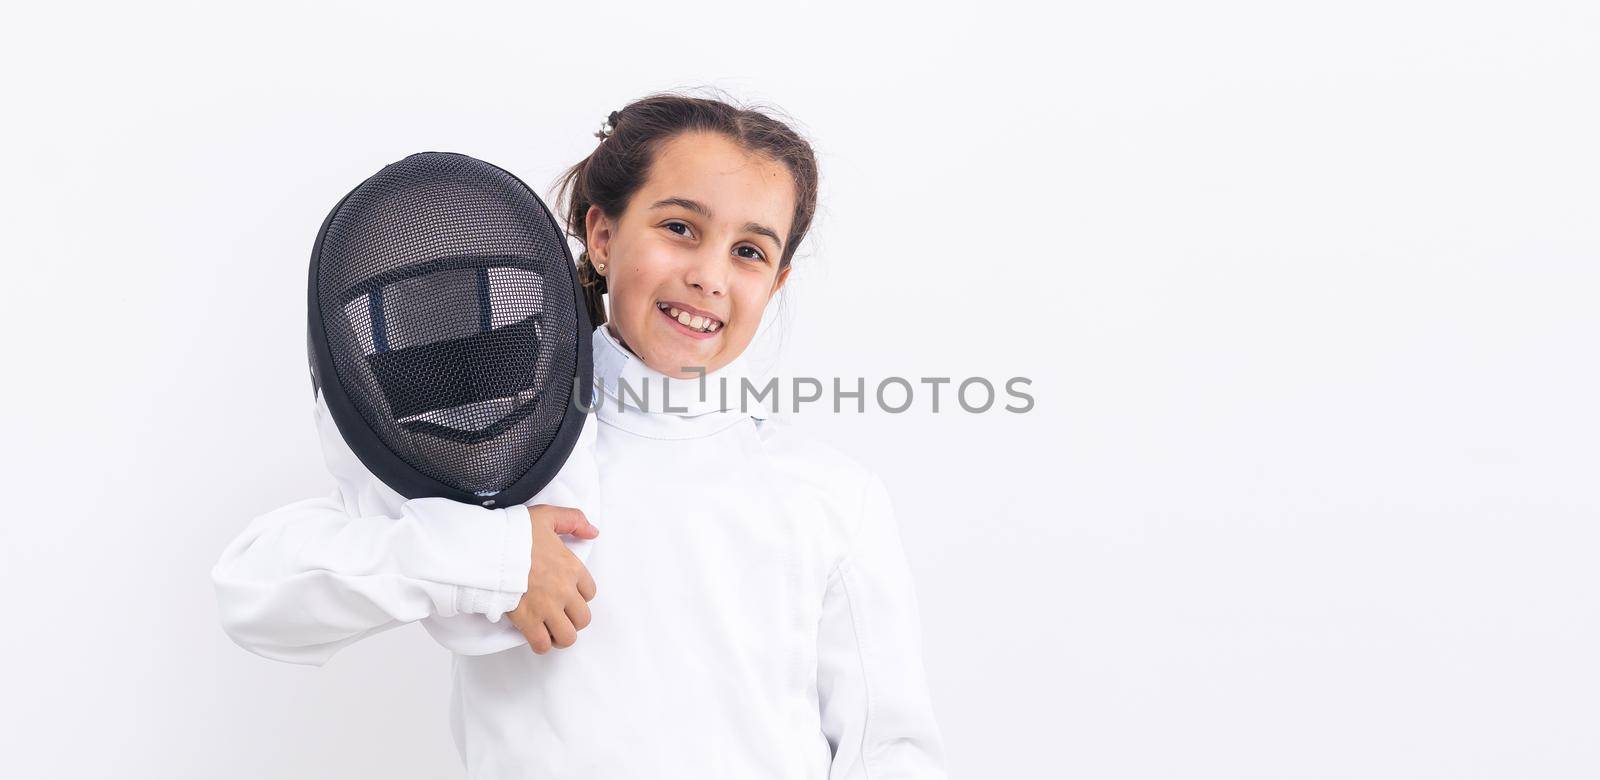 Little girl fencer with epee and mask.